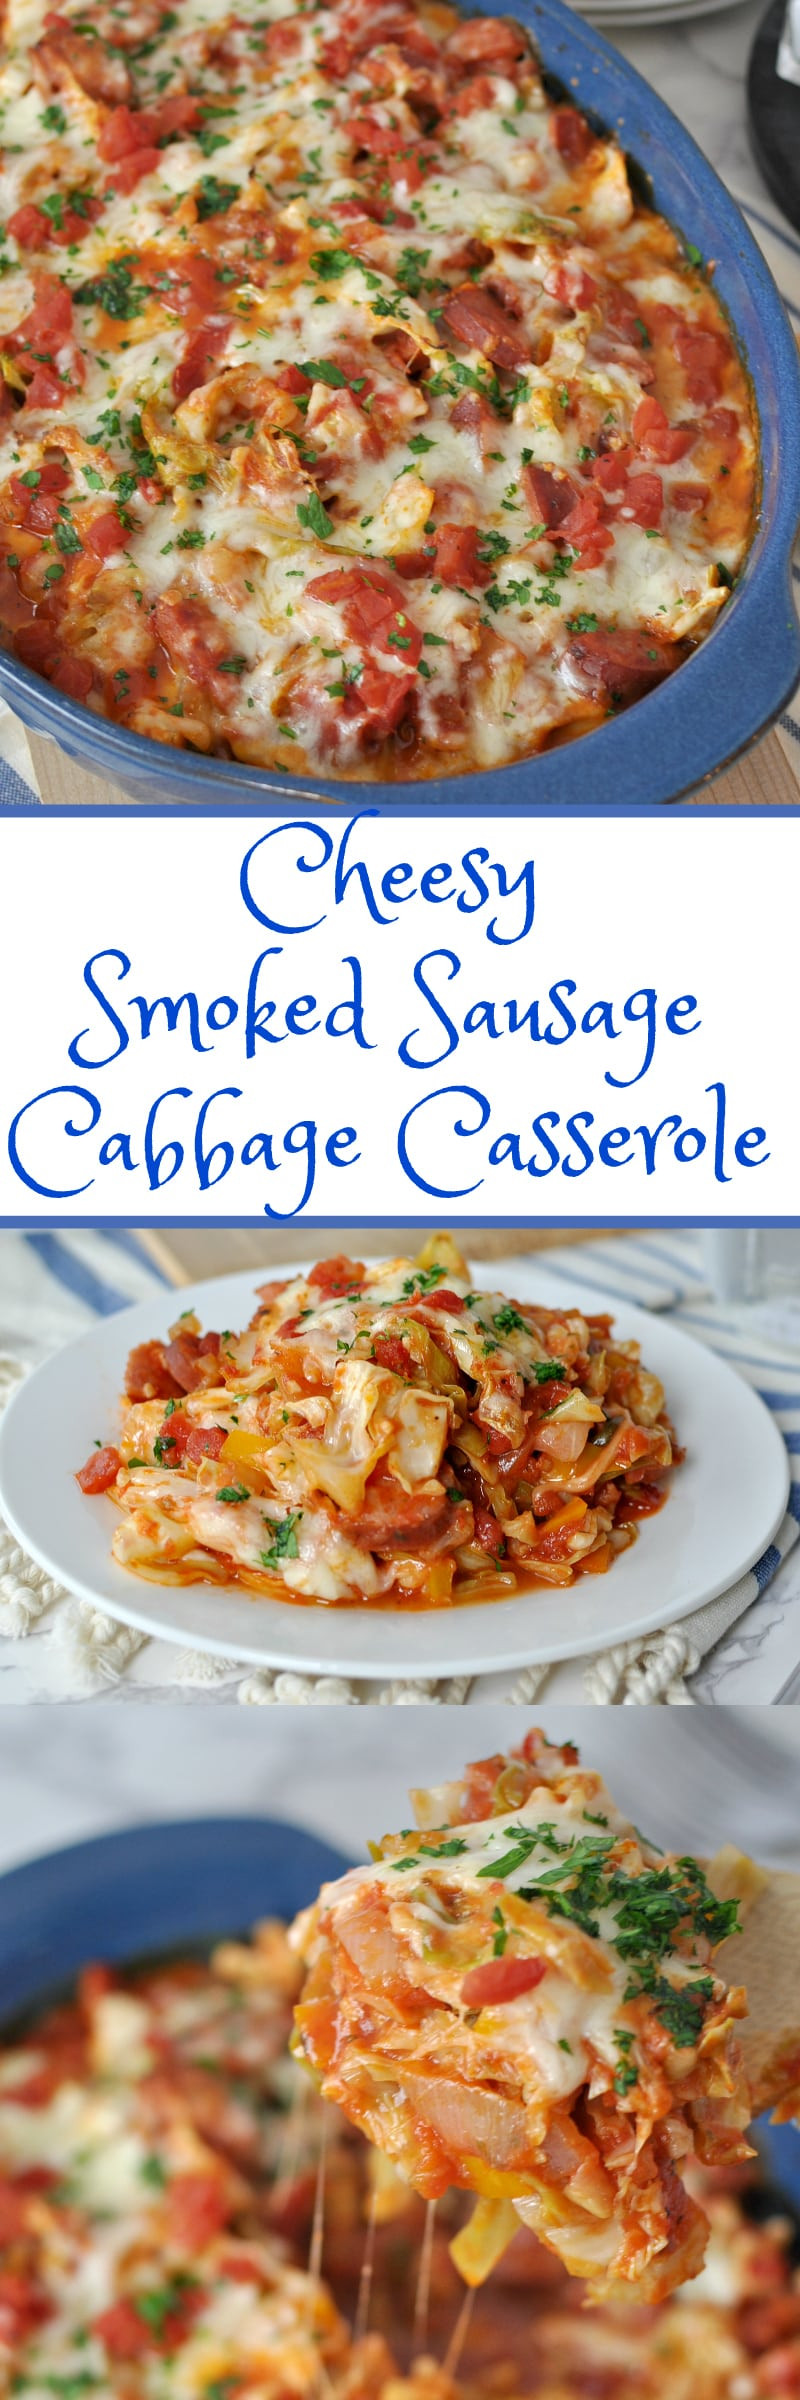 Low Carb Kielbasa Recipes
 Cheesy Sausage and Cabbage Casserole